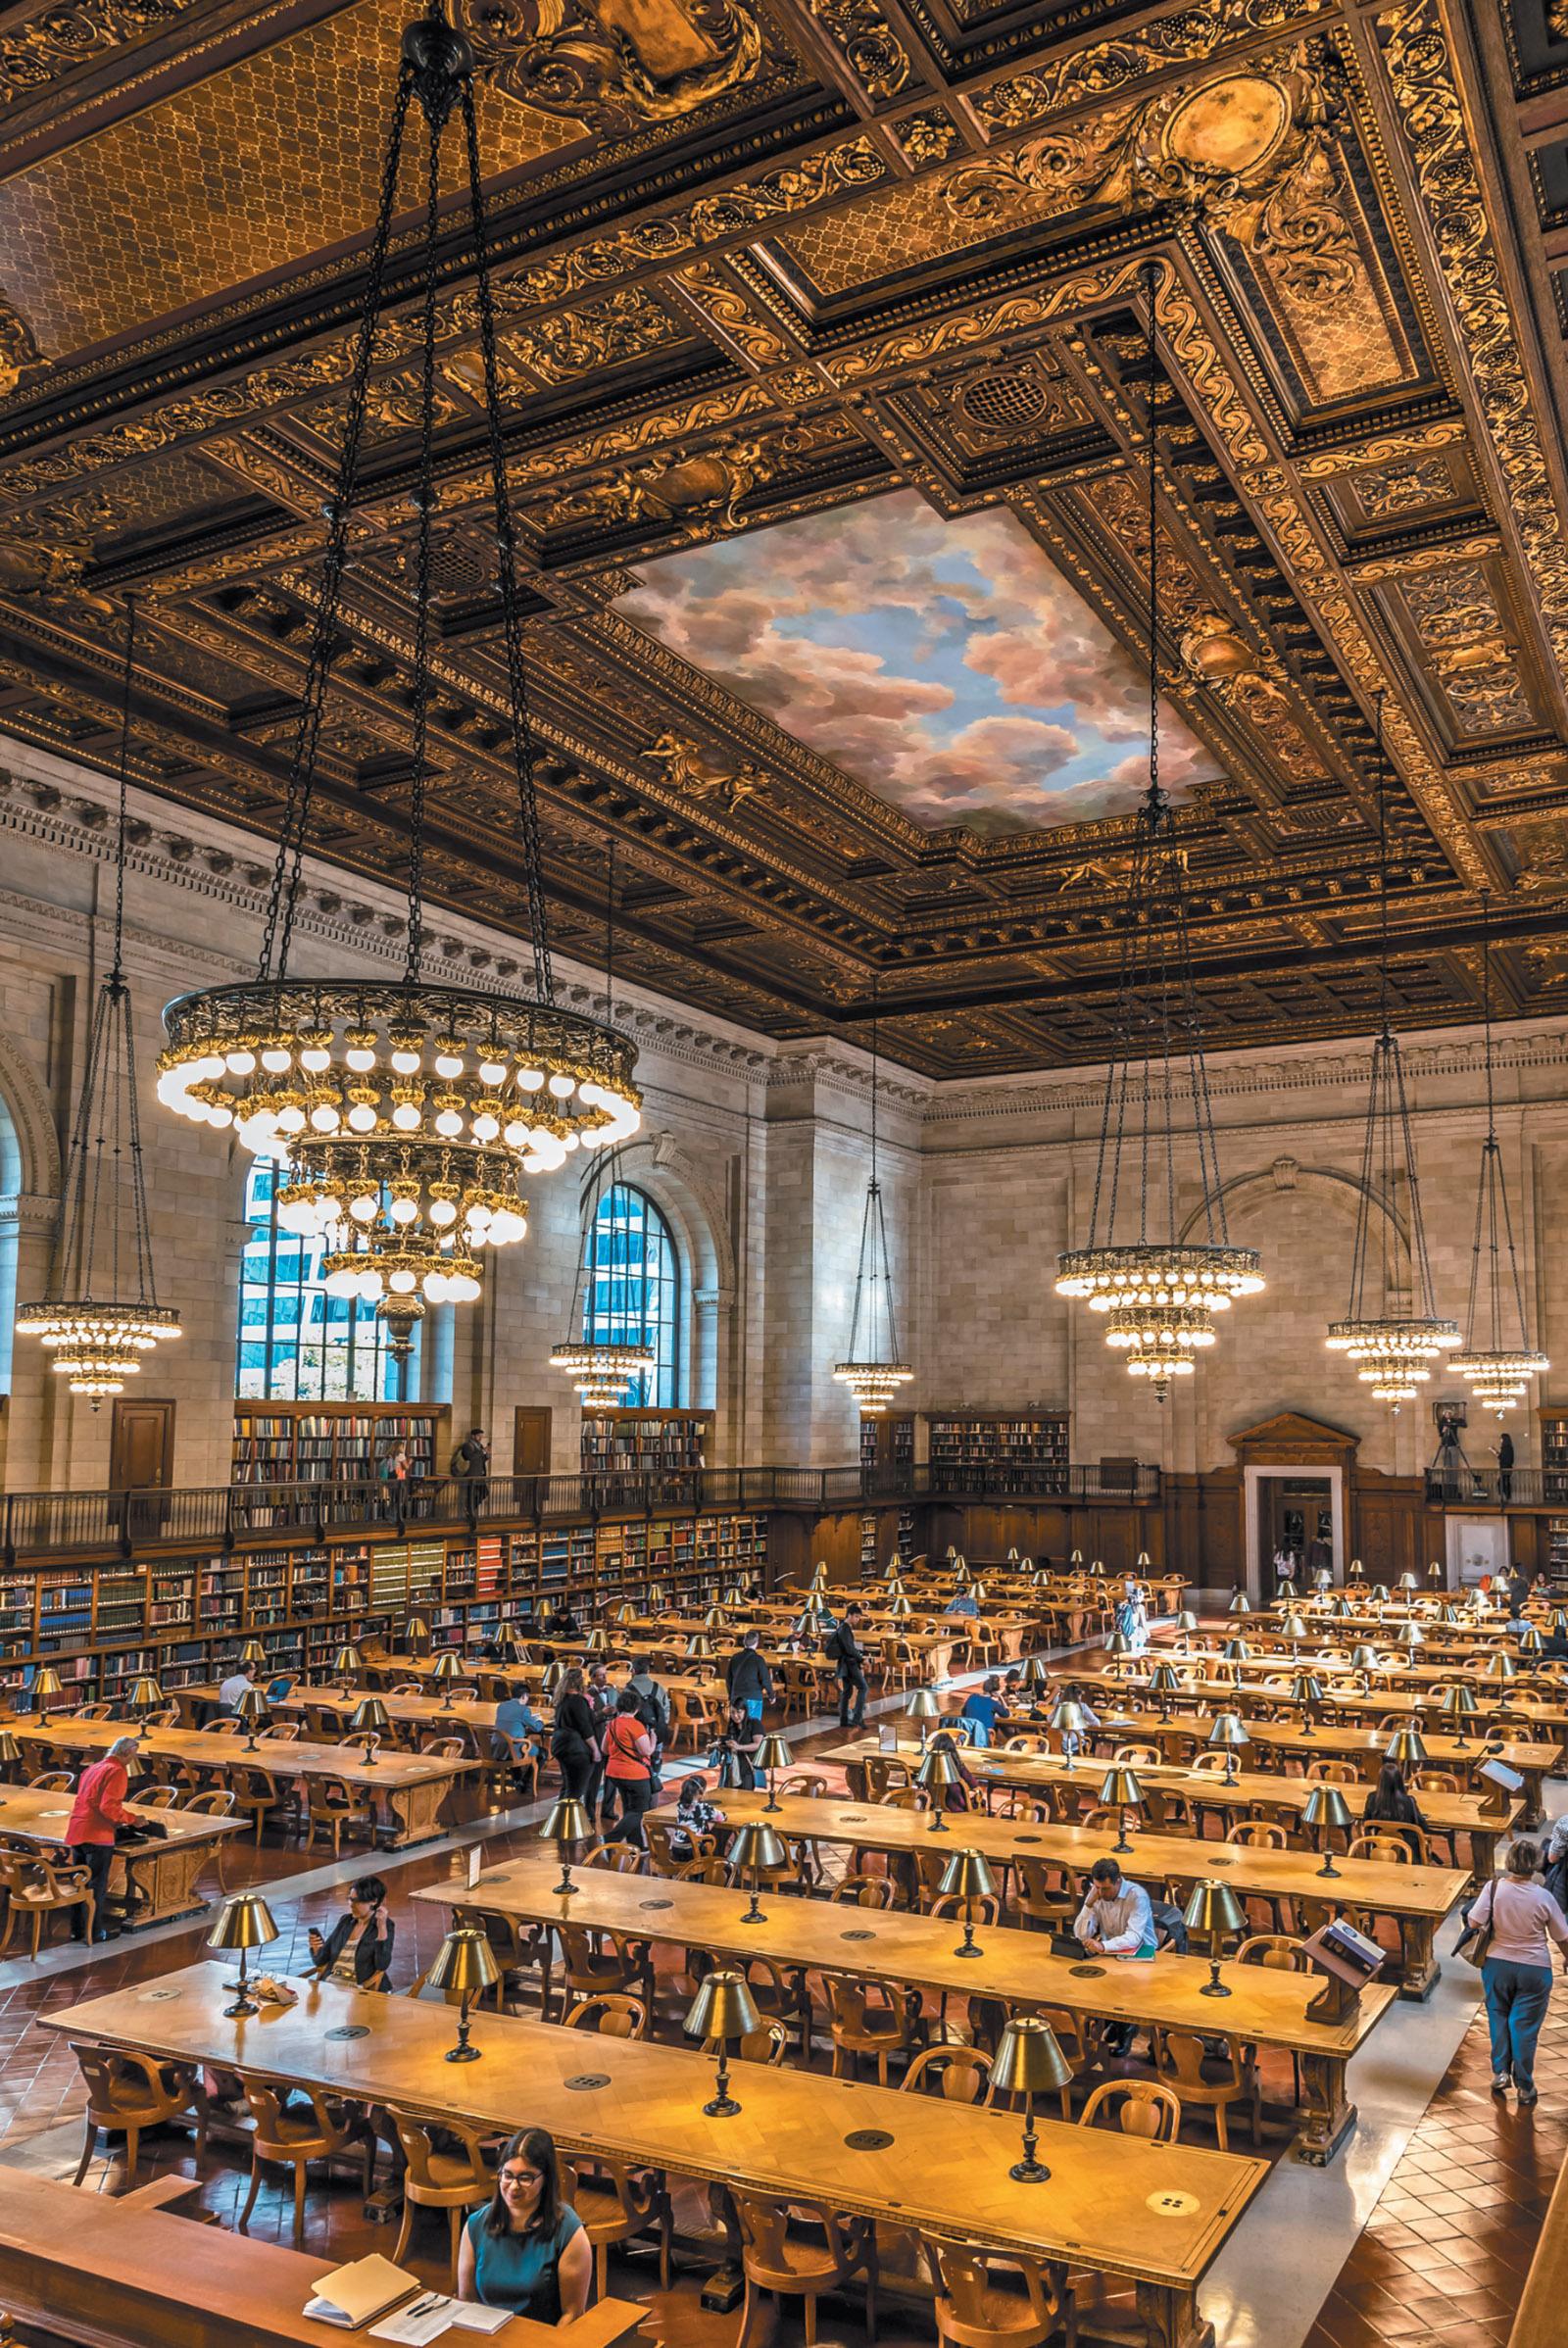 The New York Public Library’s Rose Main Reading Room, which just reopened after a two-year restoration, October 2016 